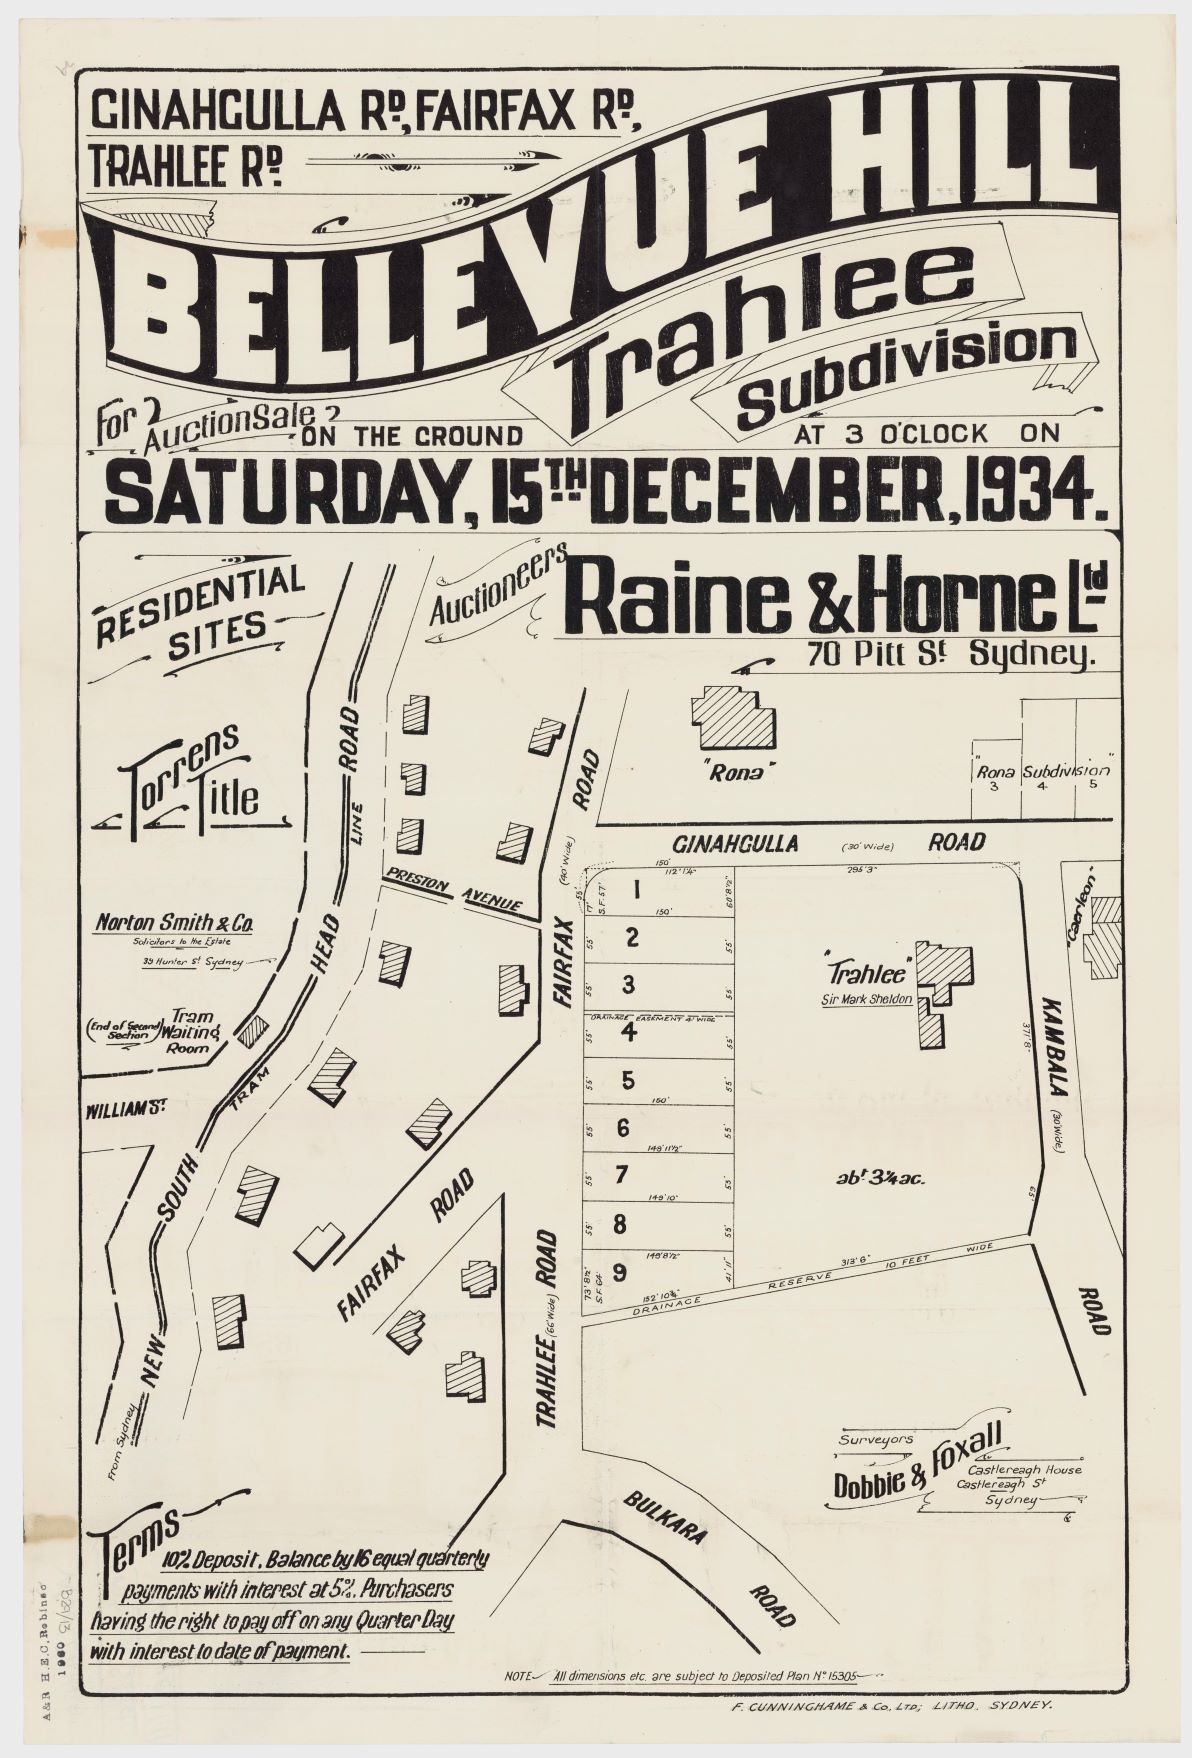 Bellevue Hill Trahlee Subdivision plan Saturday 15th December 1934 State Library of New South Wales Ref: FL10410199